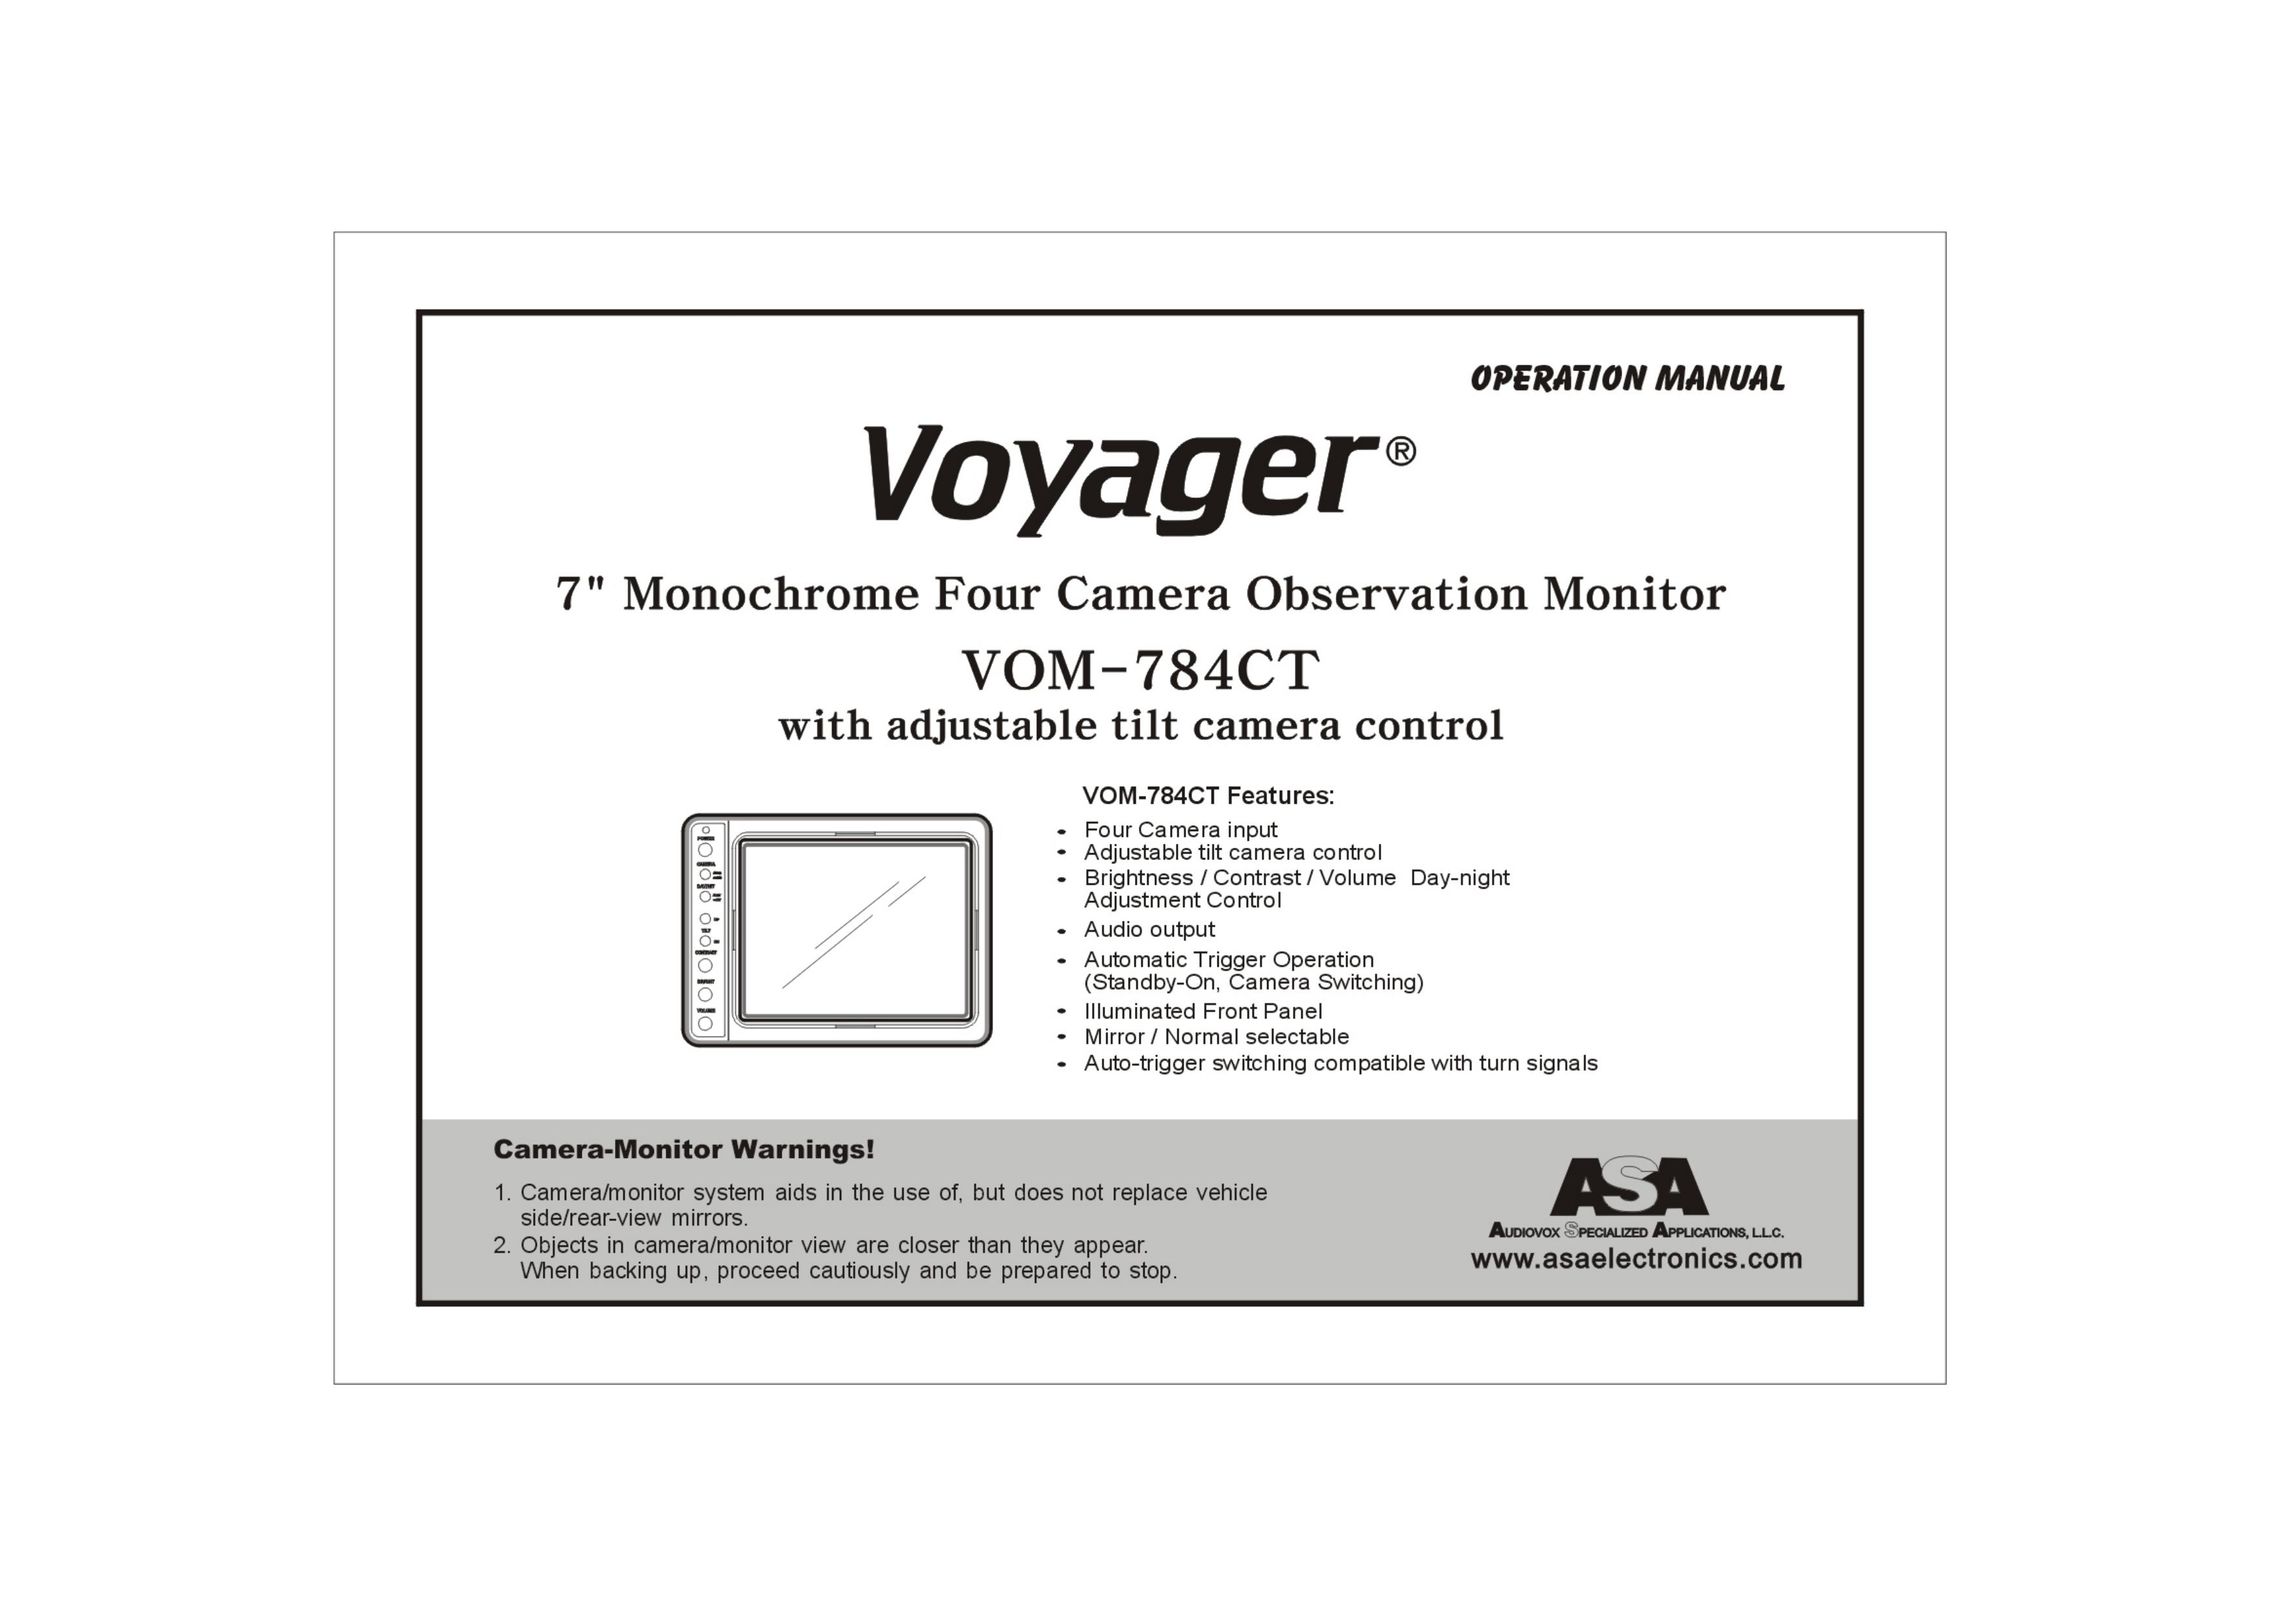 ASA Electronics VOM-784CT Car Video System User Manual